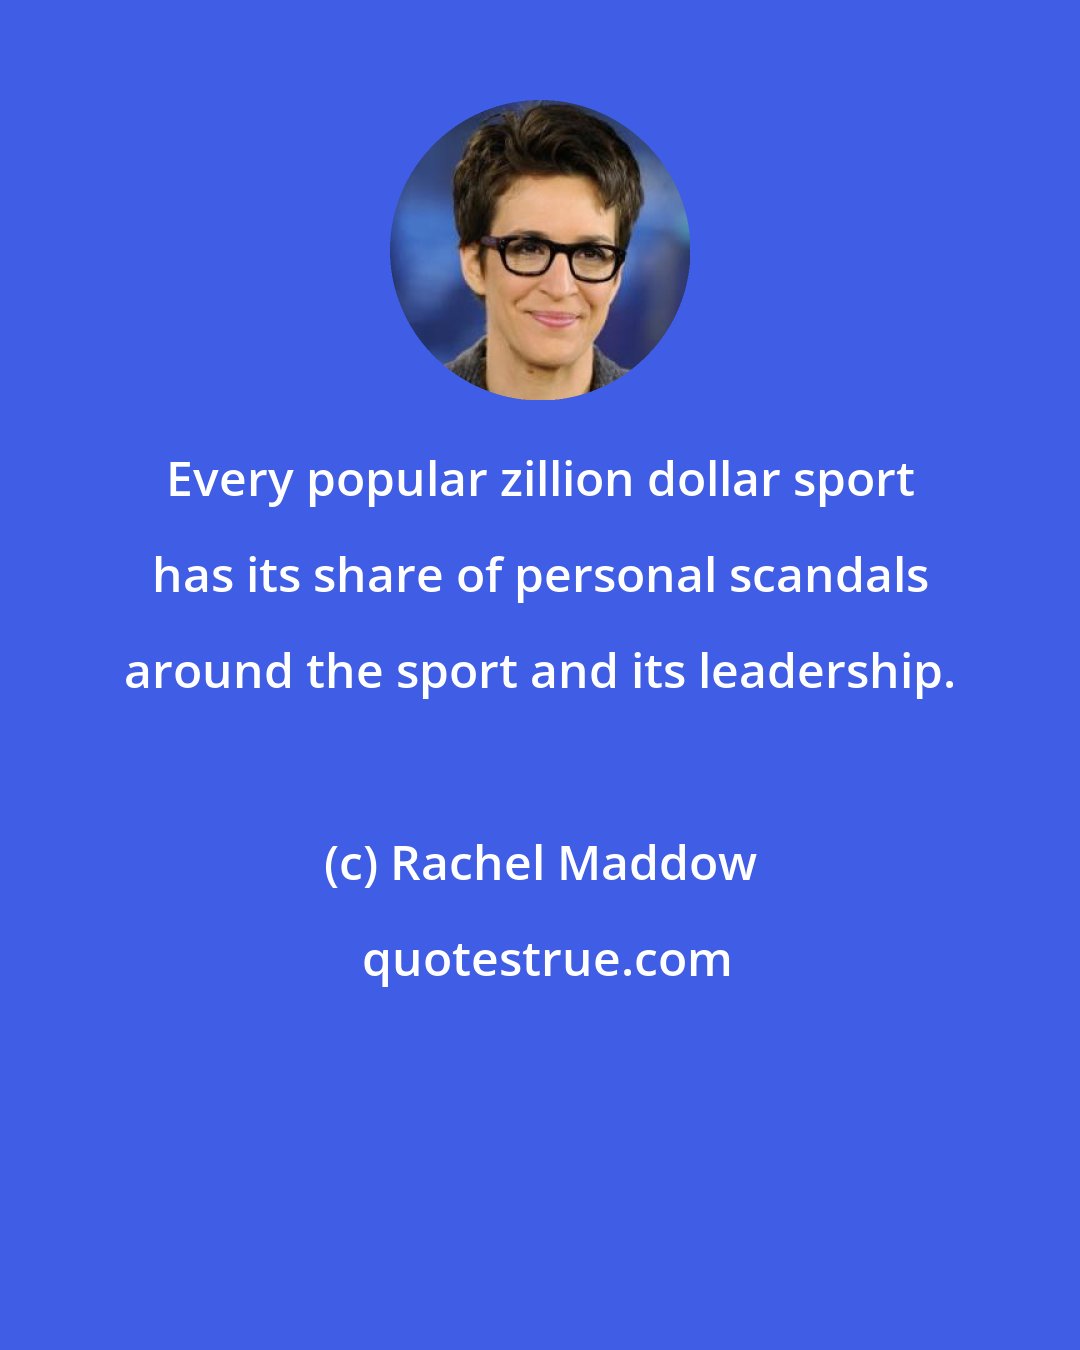 Rachel Maddow: Every popular zillion dollar sport has its share of personal scandals around the sport and its leadership.